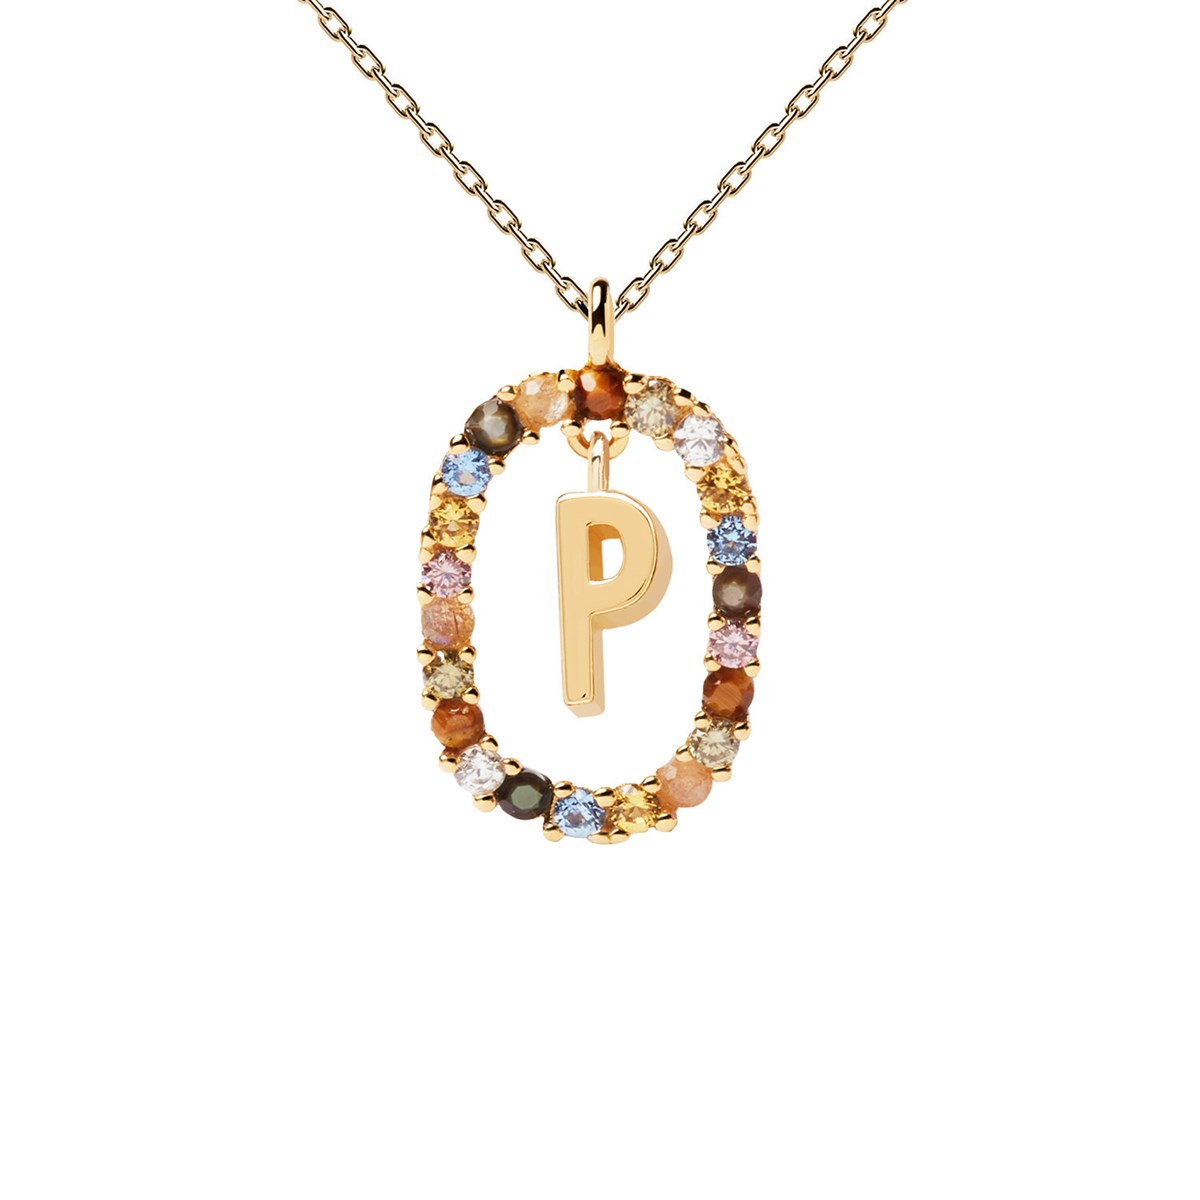 Collier PDPaola Lettre P plaqué or
Collection NEW LETTERS